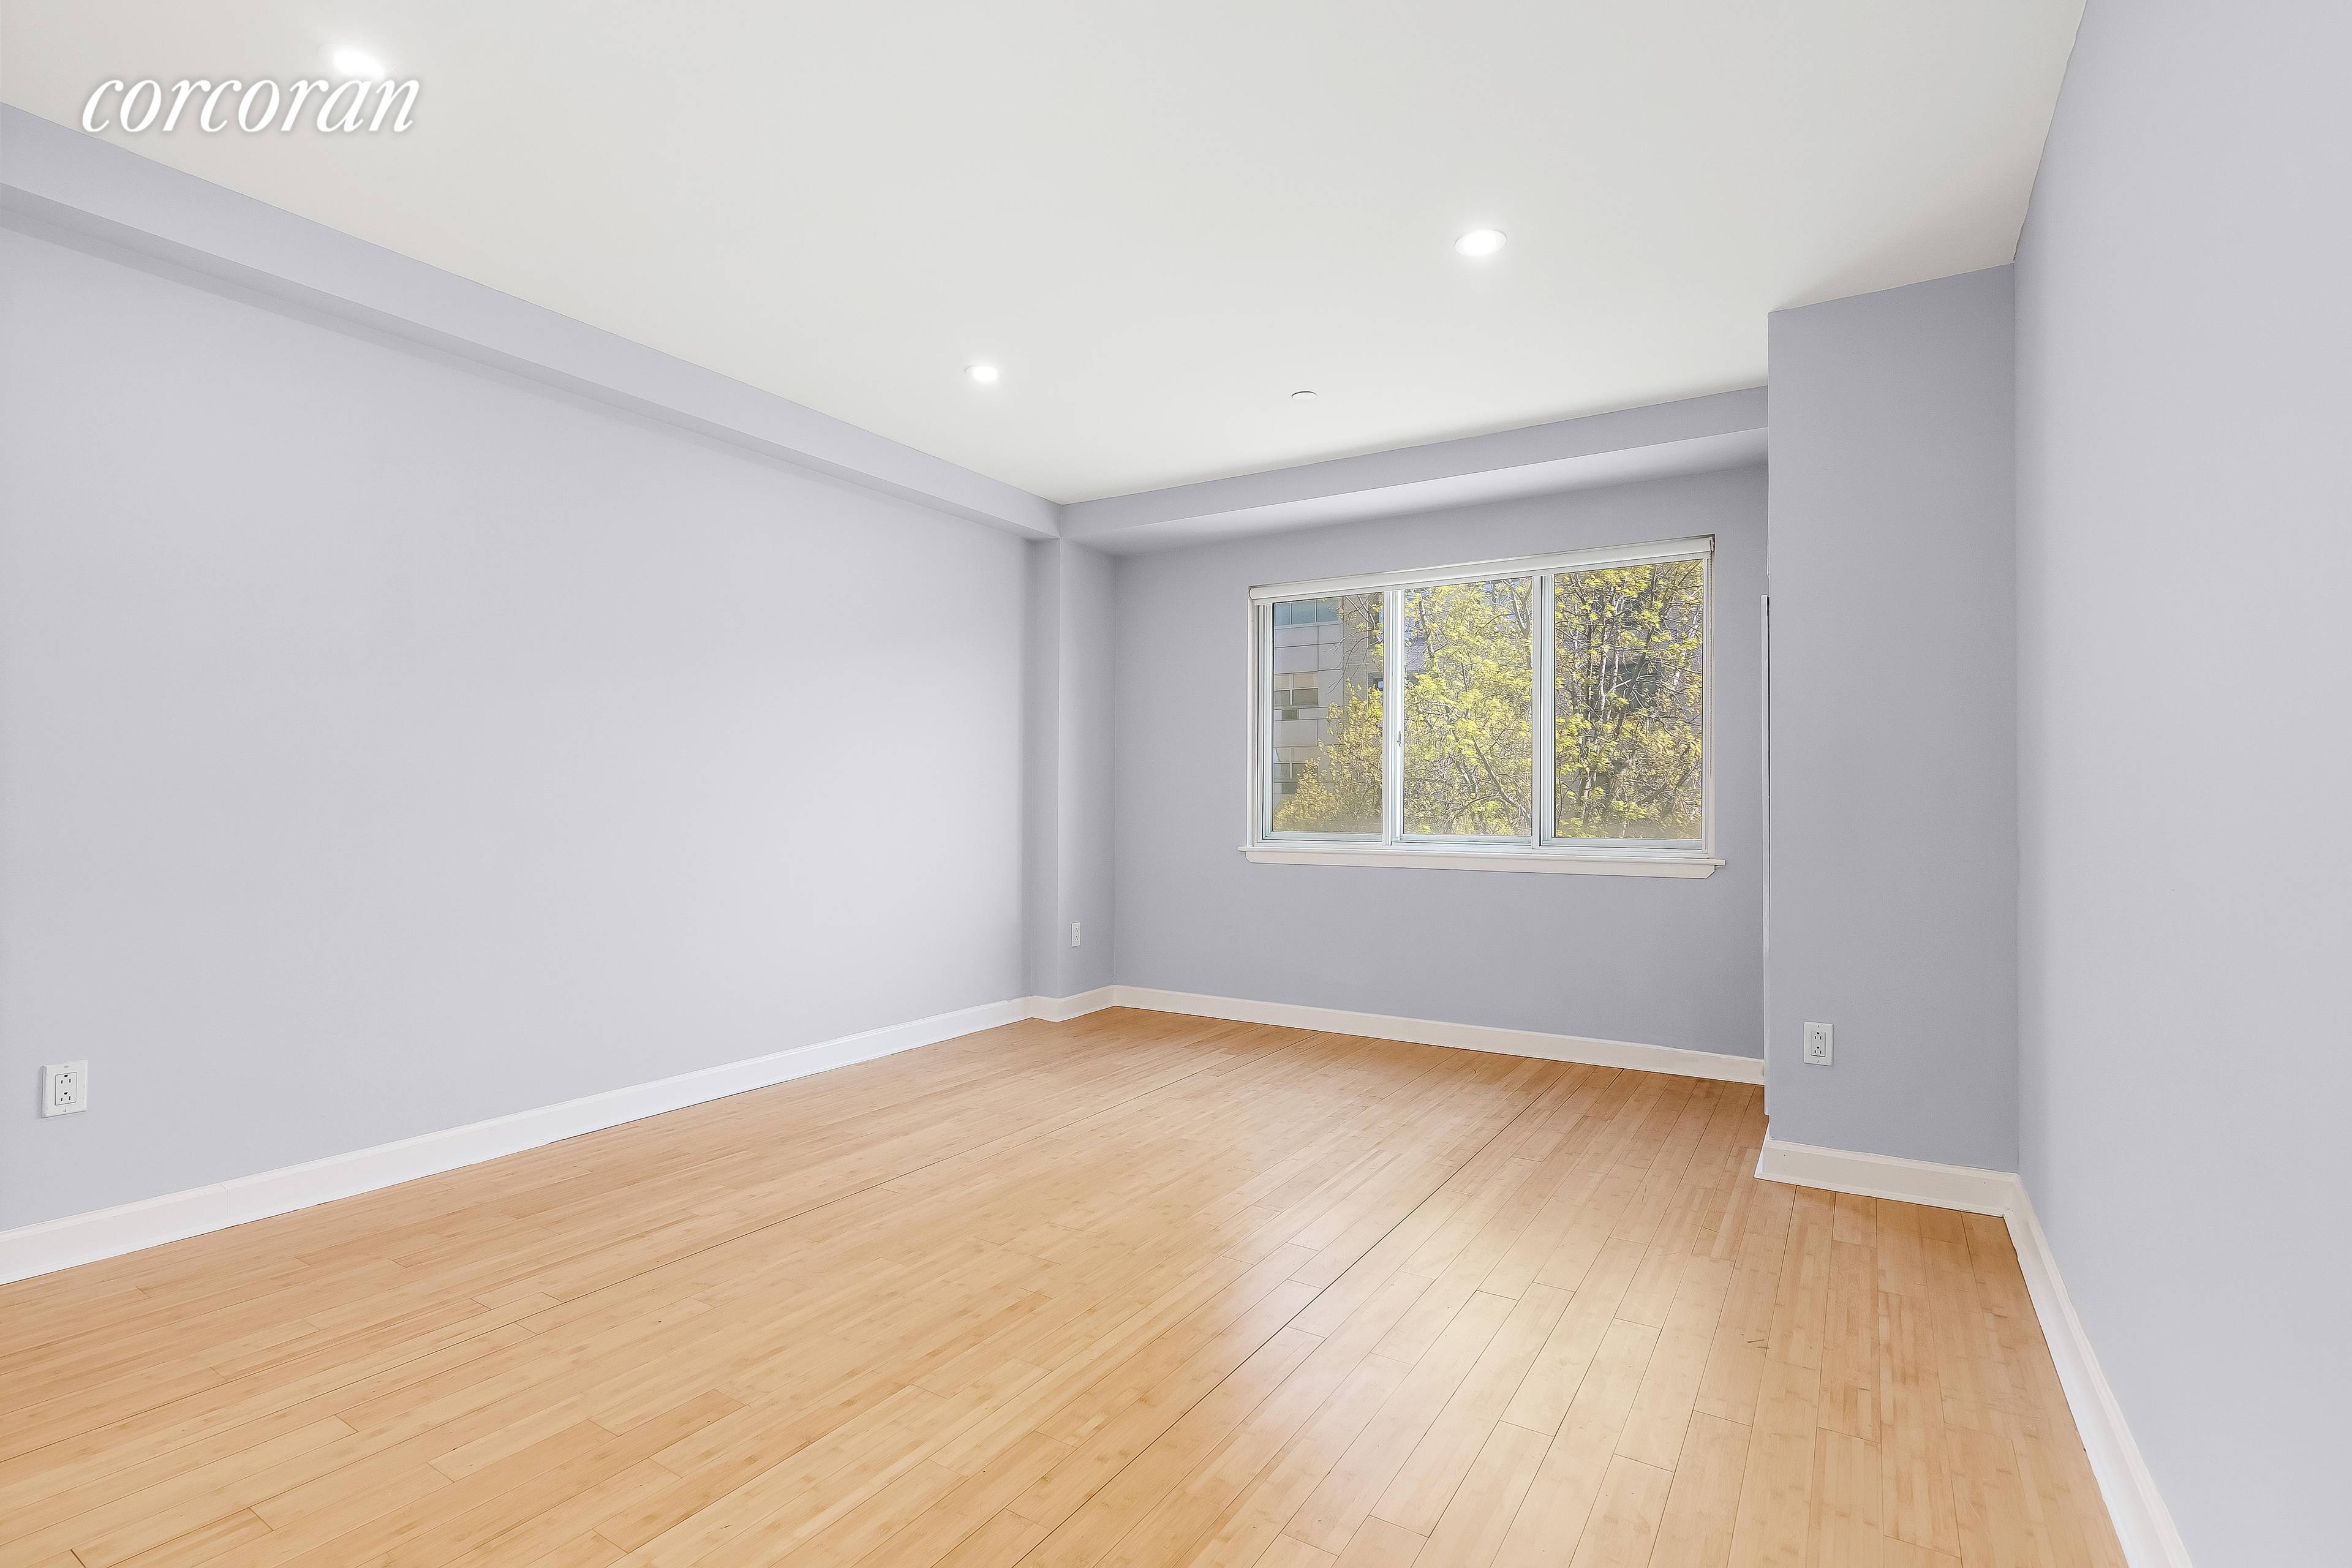 Are you looking for one of the quietest apartments in Harlem ?